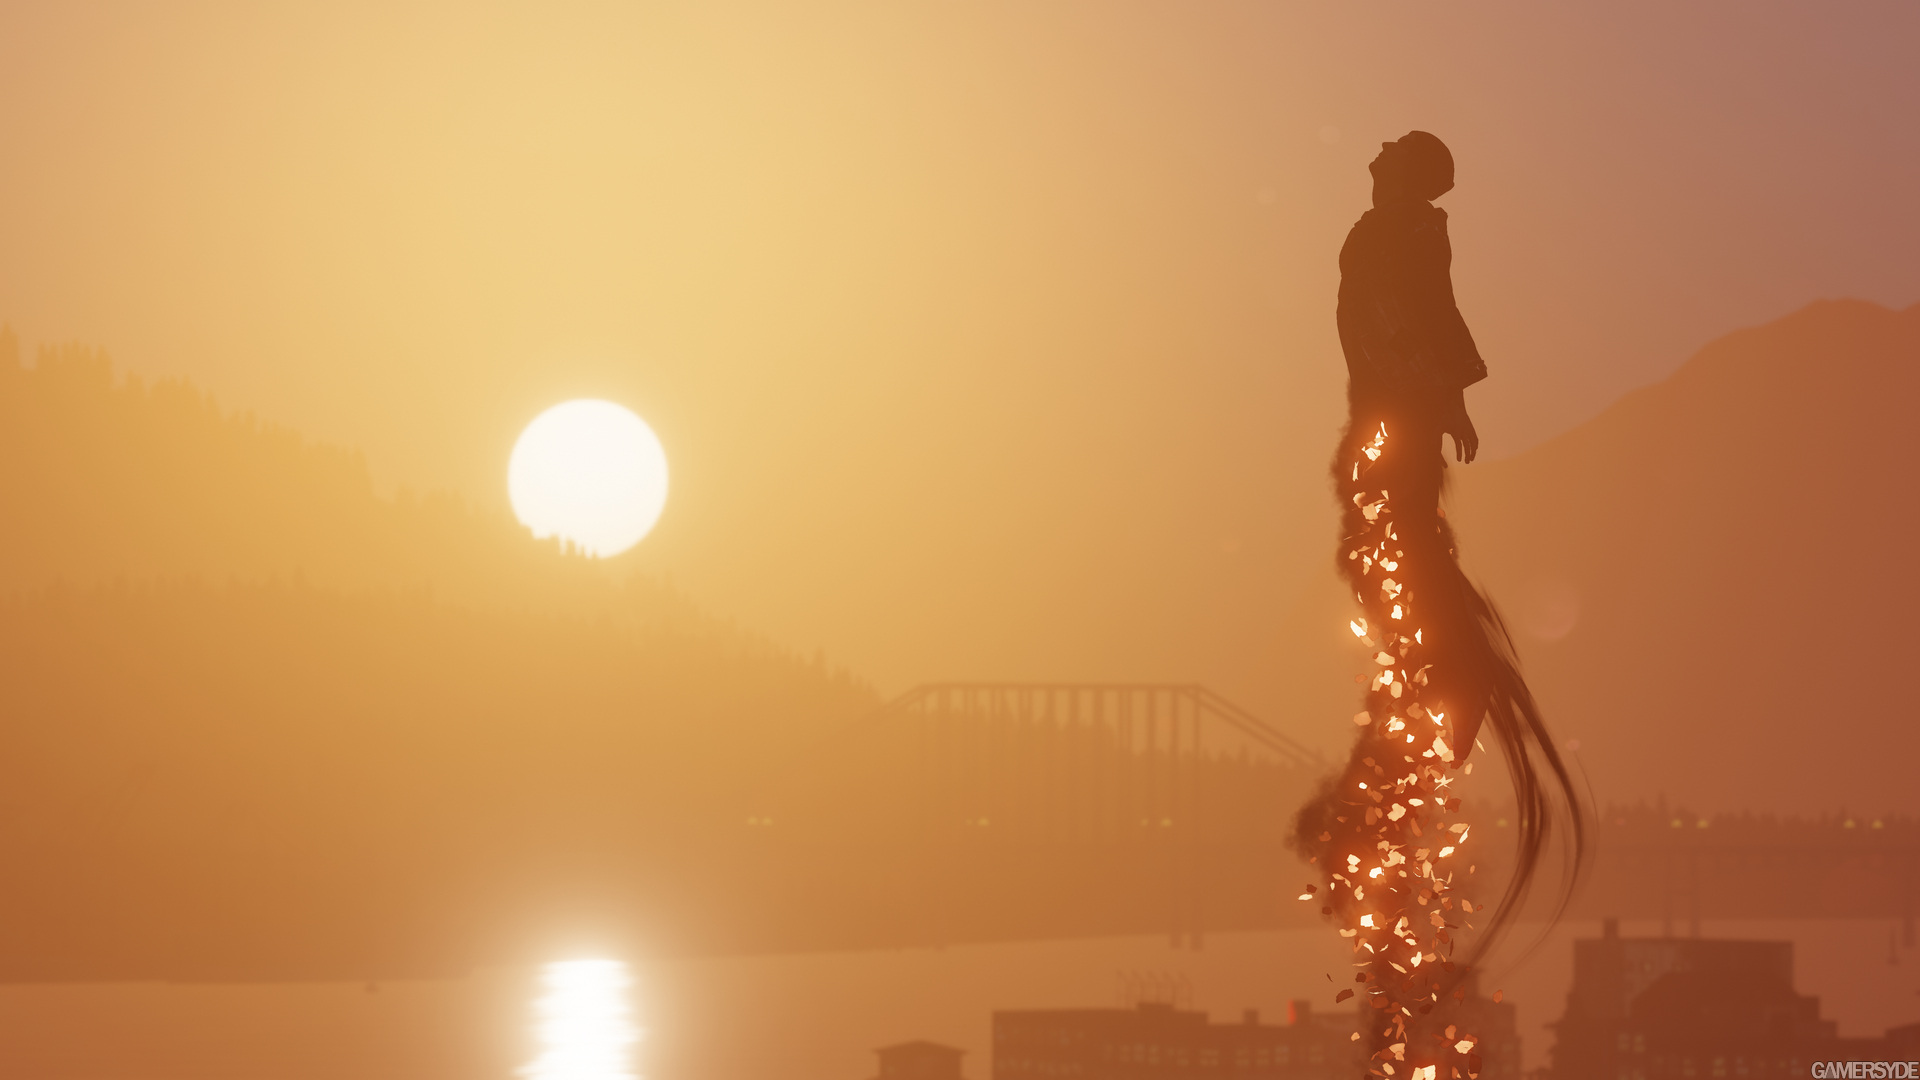 image_infamous_second_son-22309-2661_0007.jpg